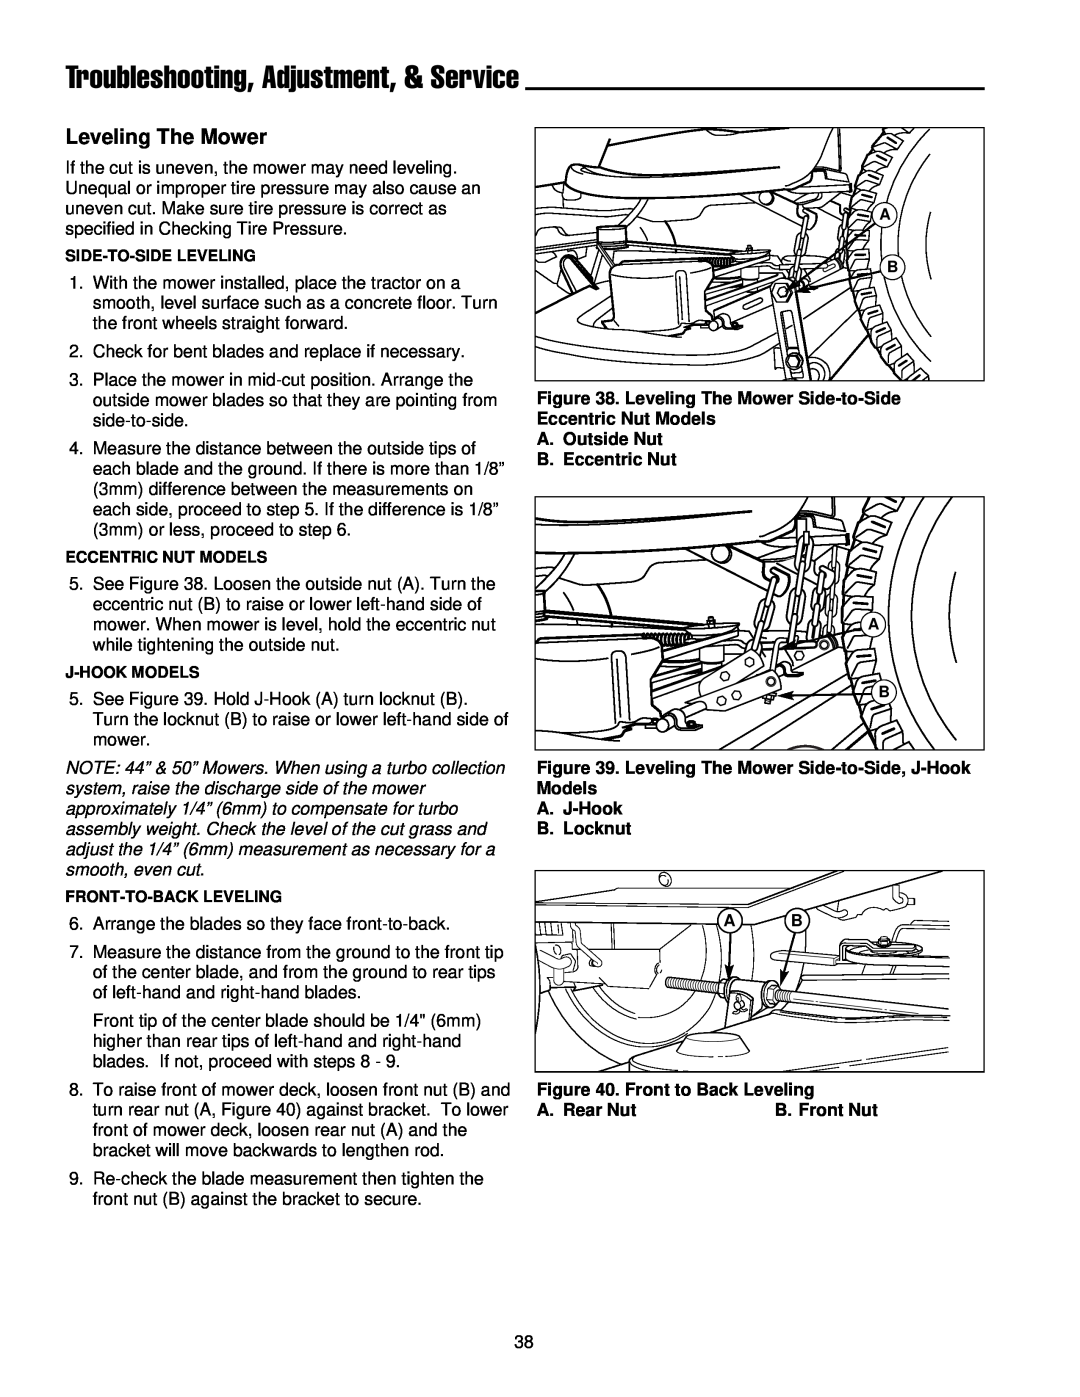 Simplicity 300 Series manual Troubleshooting, Adjustment, & Service, Leveling The Mower, A.Outside Nut B.Eccentric Nut 